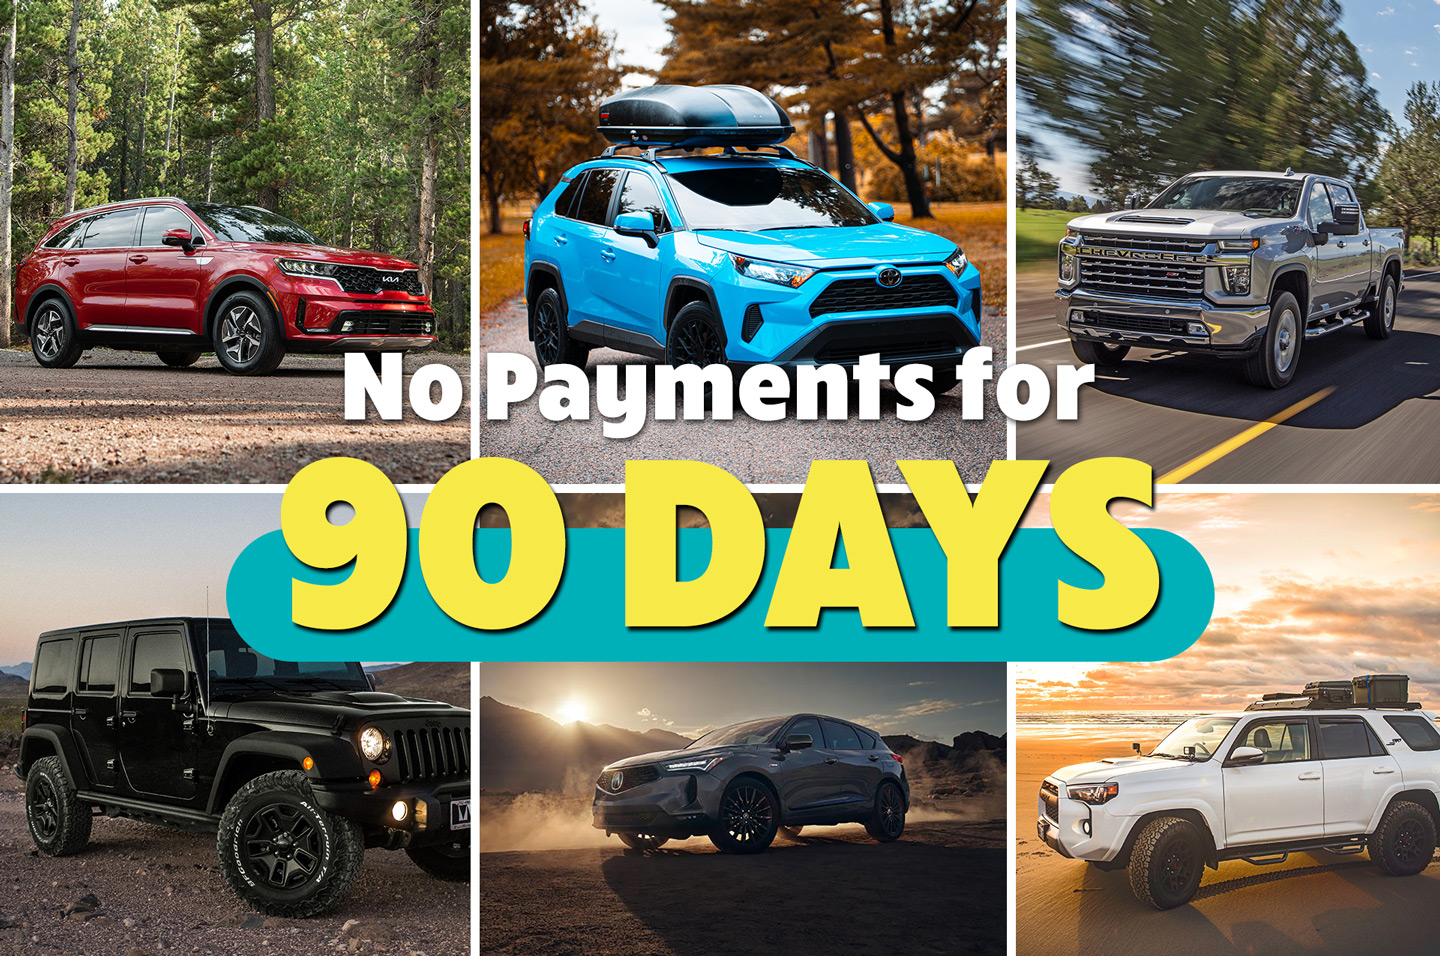 No payments for 90 days